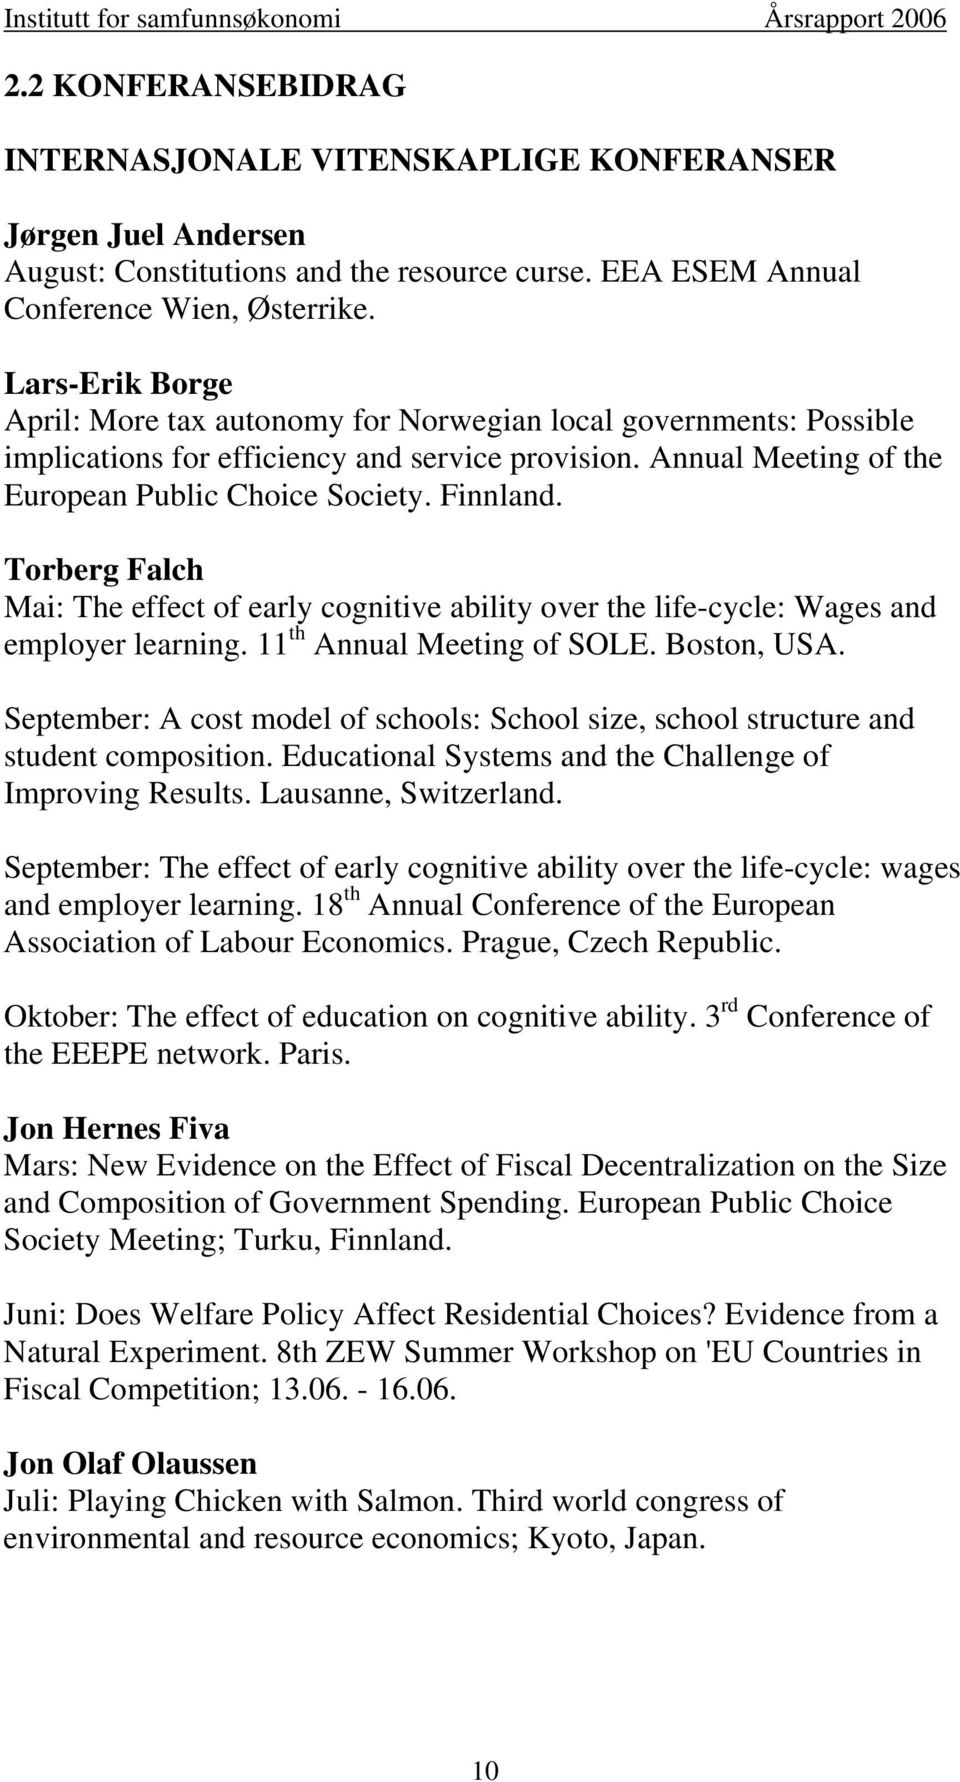 Torberg Falch Mai: The effect of early cognitive ability over the life-cycle: Wages and employer learning. 11 th Annual Meeting of SOLE. Boston, USA.